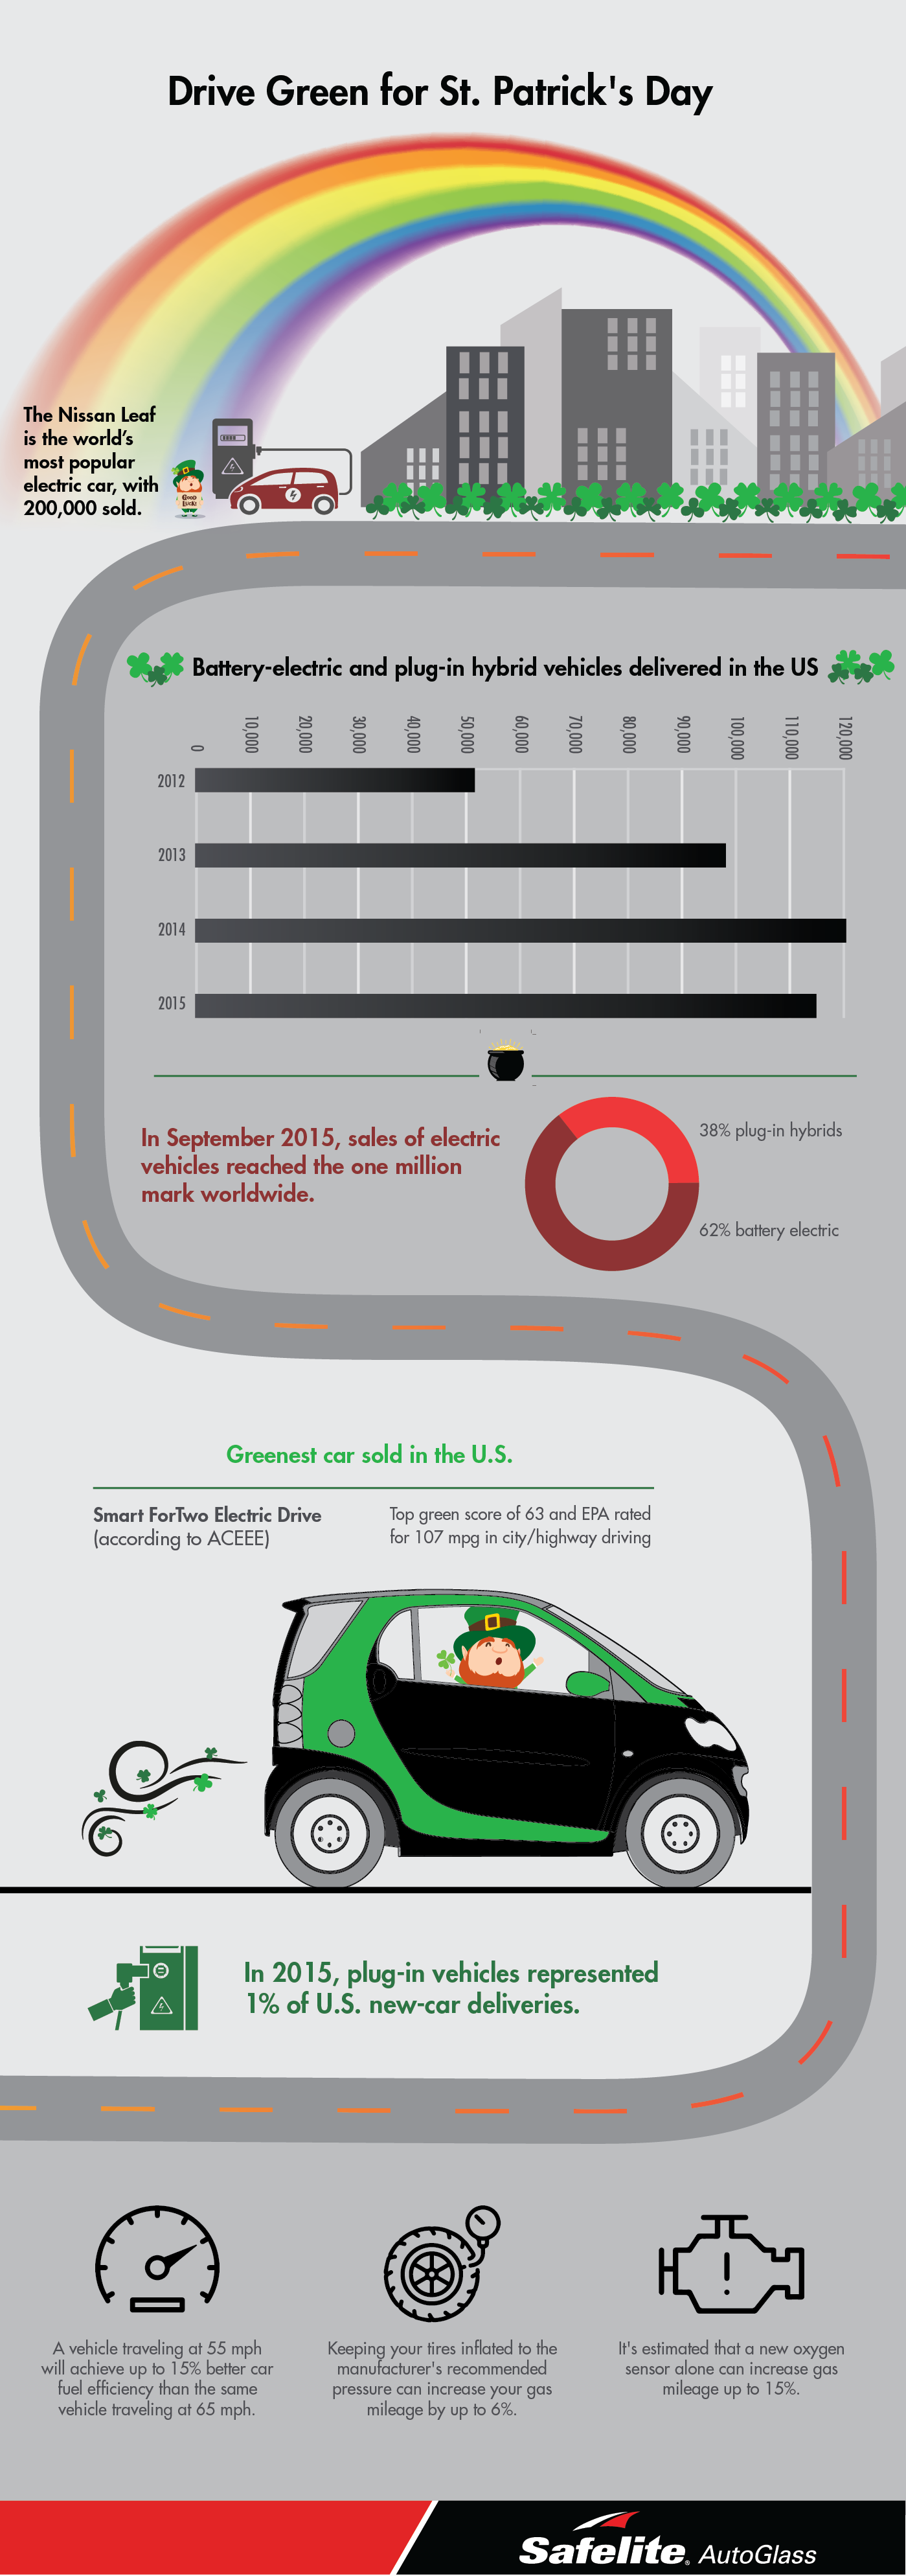 Go green in more way than one this St. Patrick's Day! Check out Safelite's infographic with fun facts about green driving.